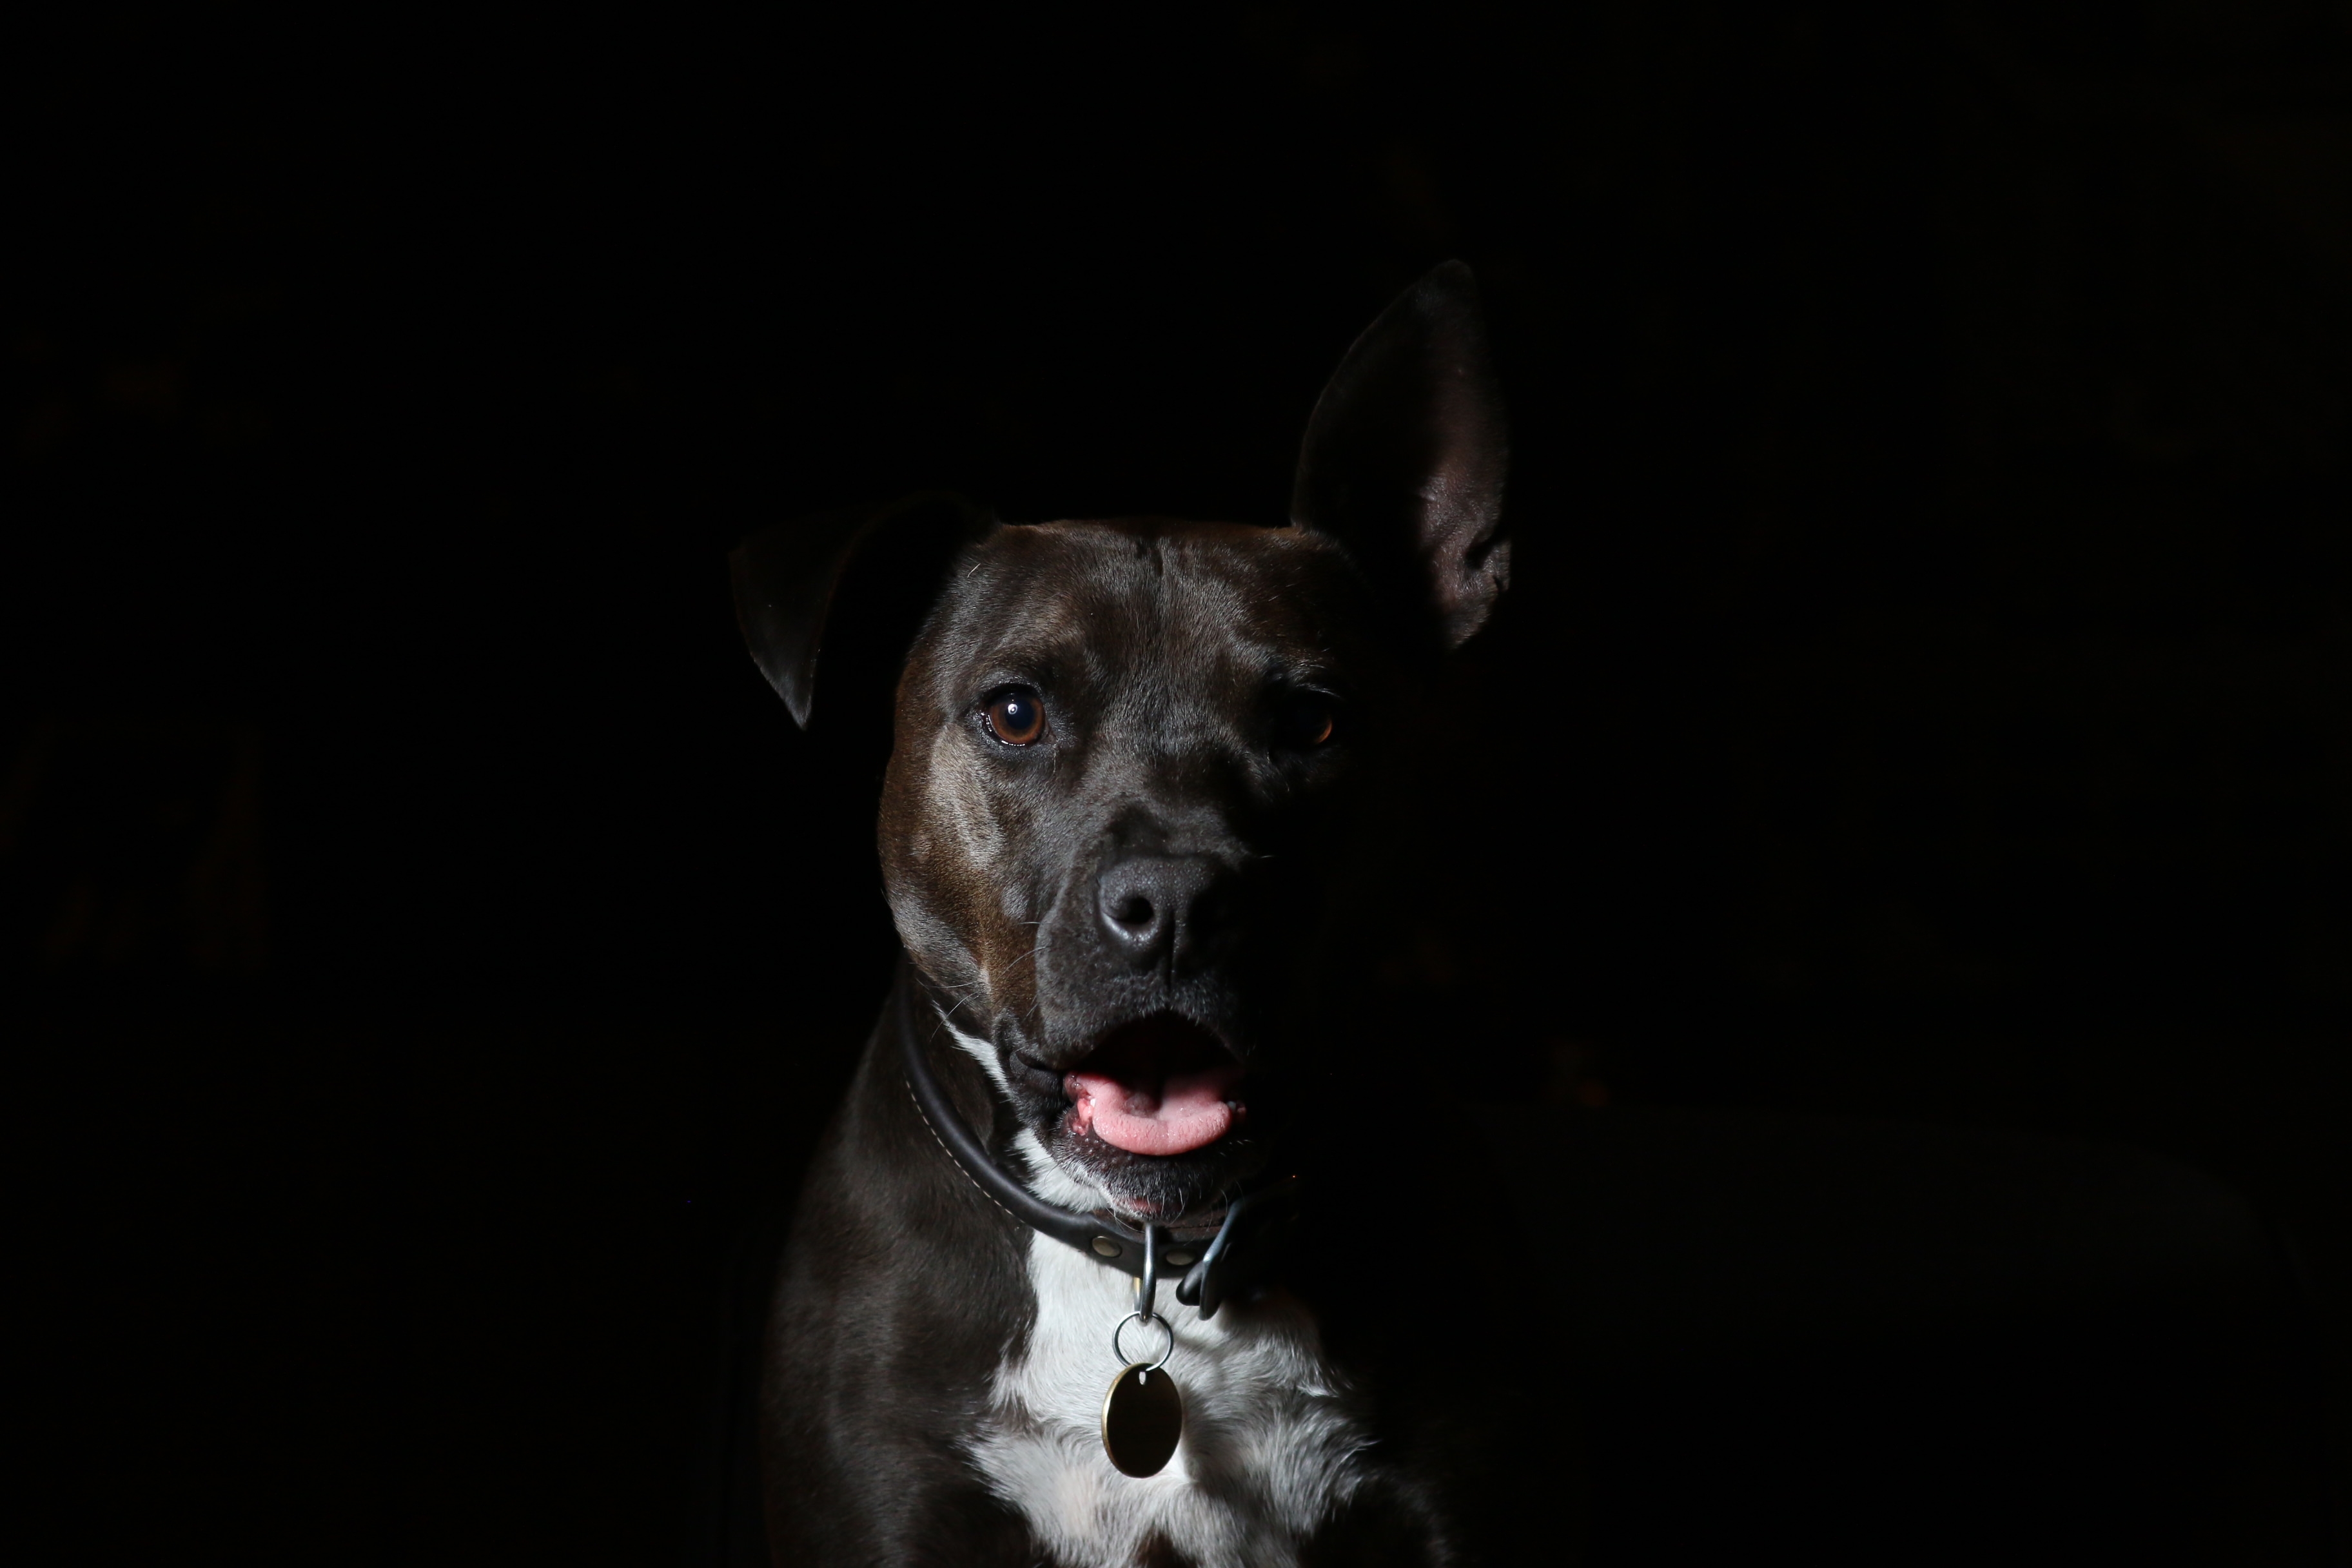 American Staffordshire Terrier on black background